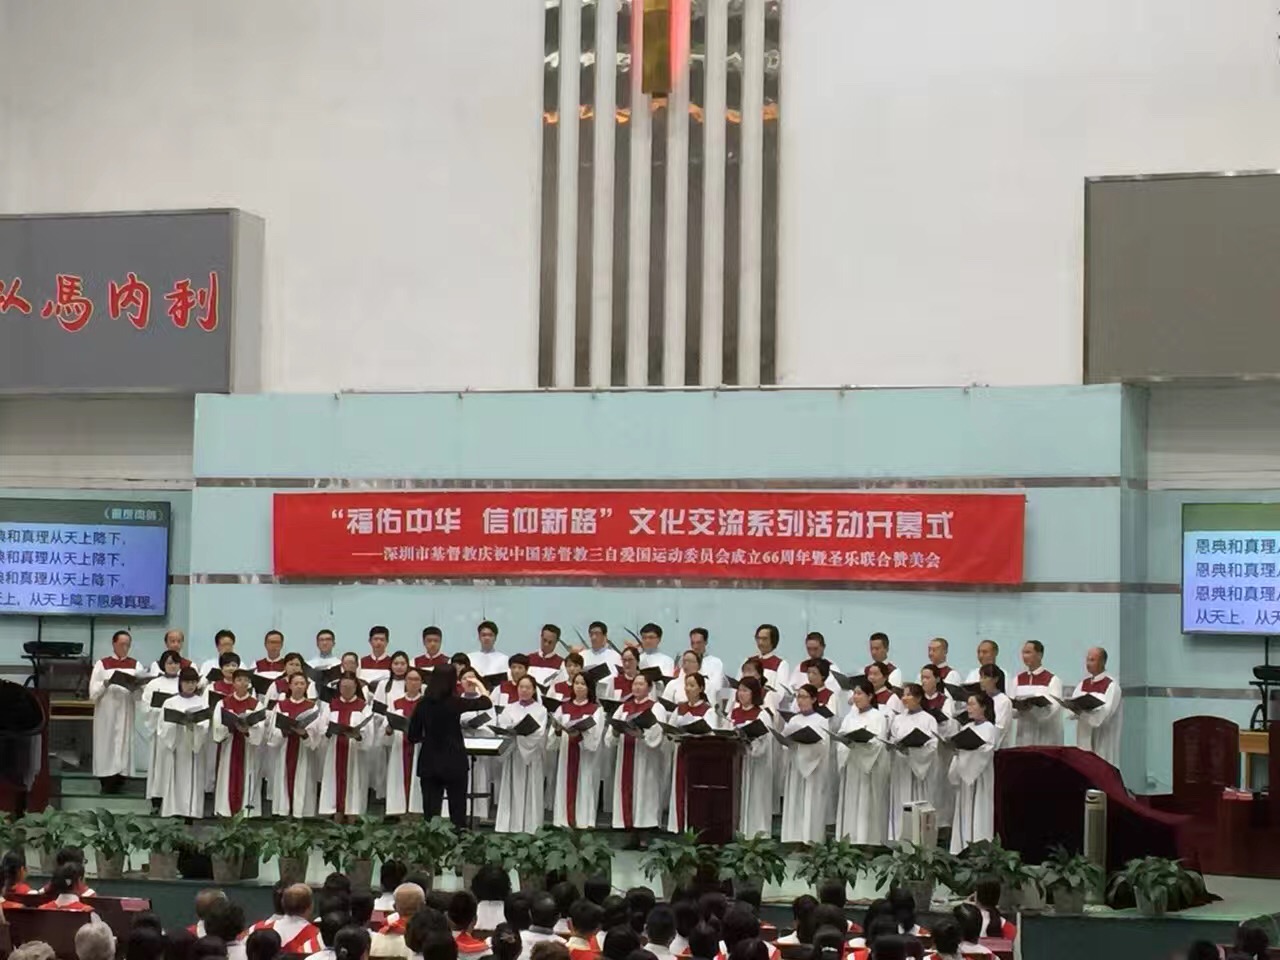 A joint praise concert of sacred music held on Sept. 17 in Shenzhen Church